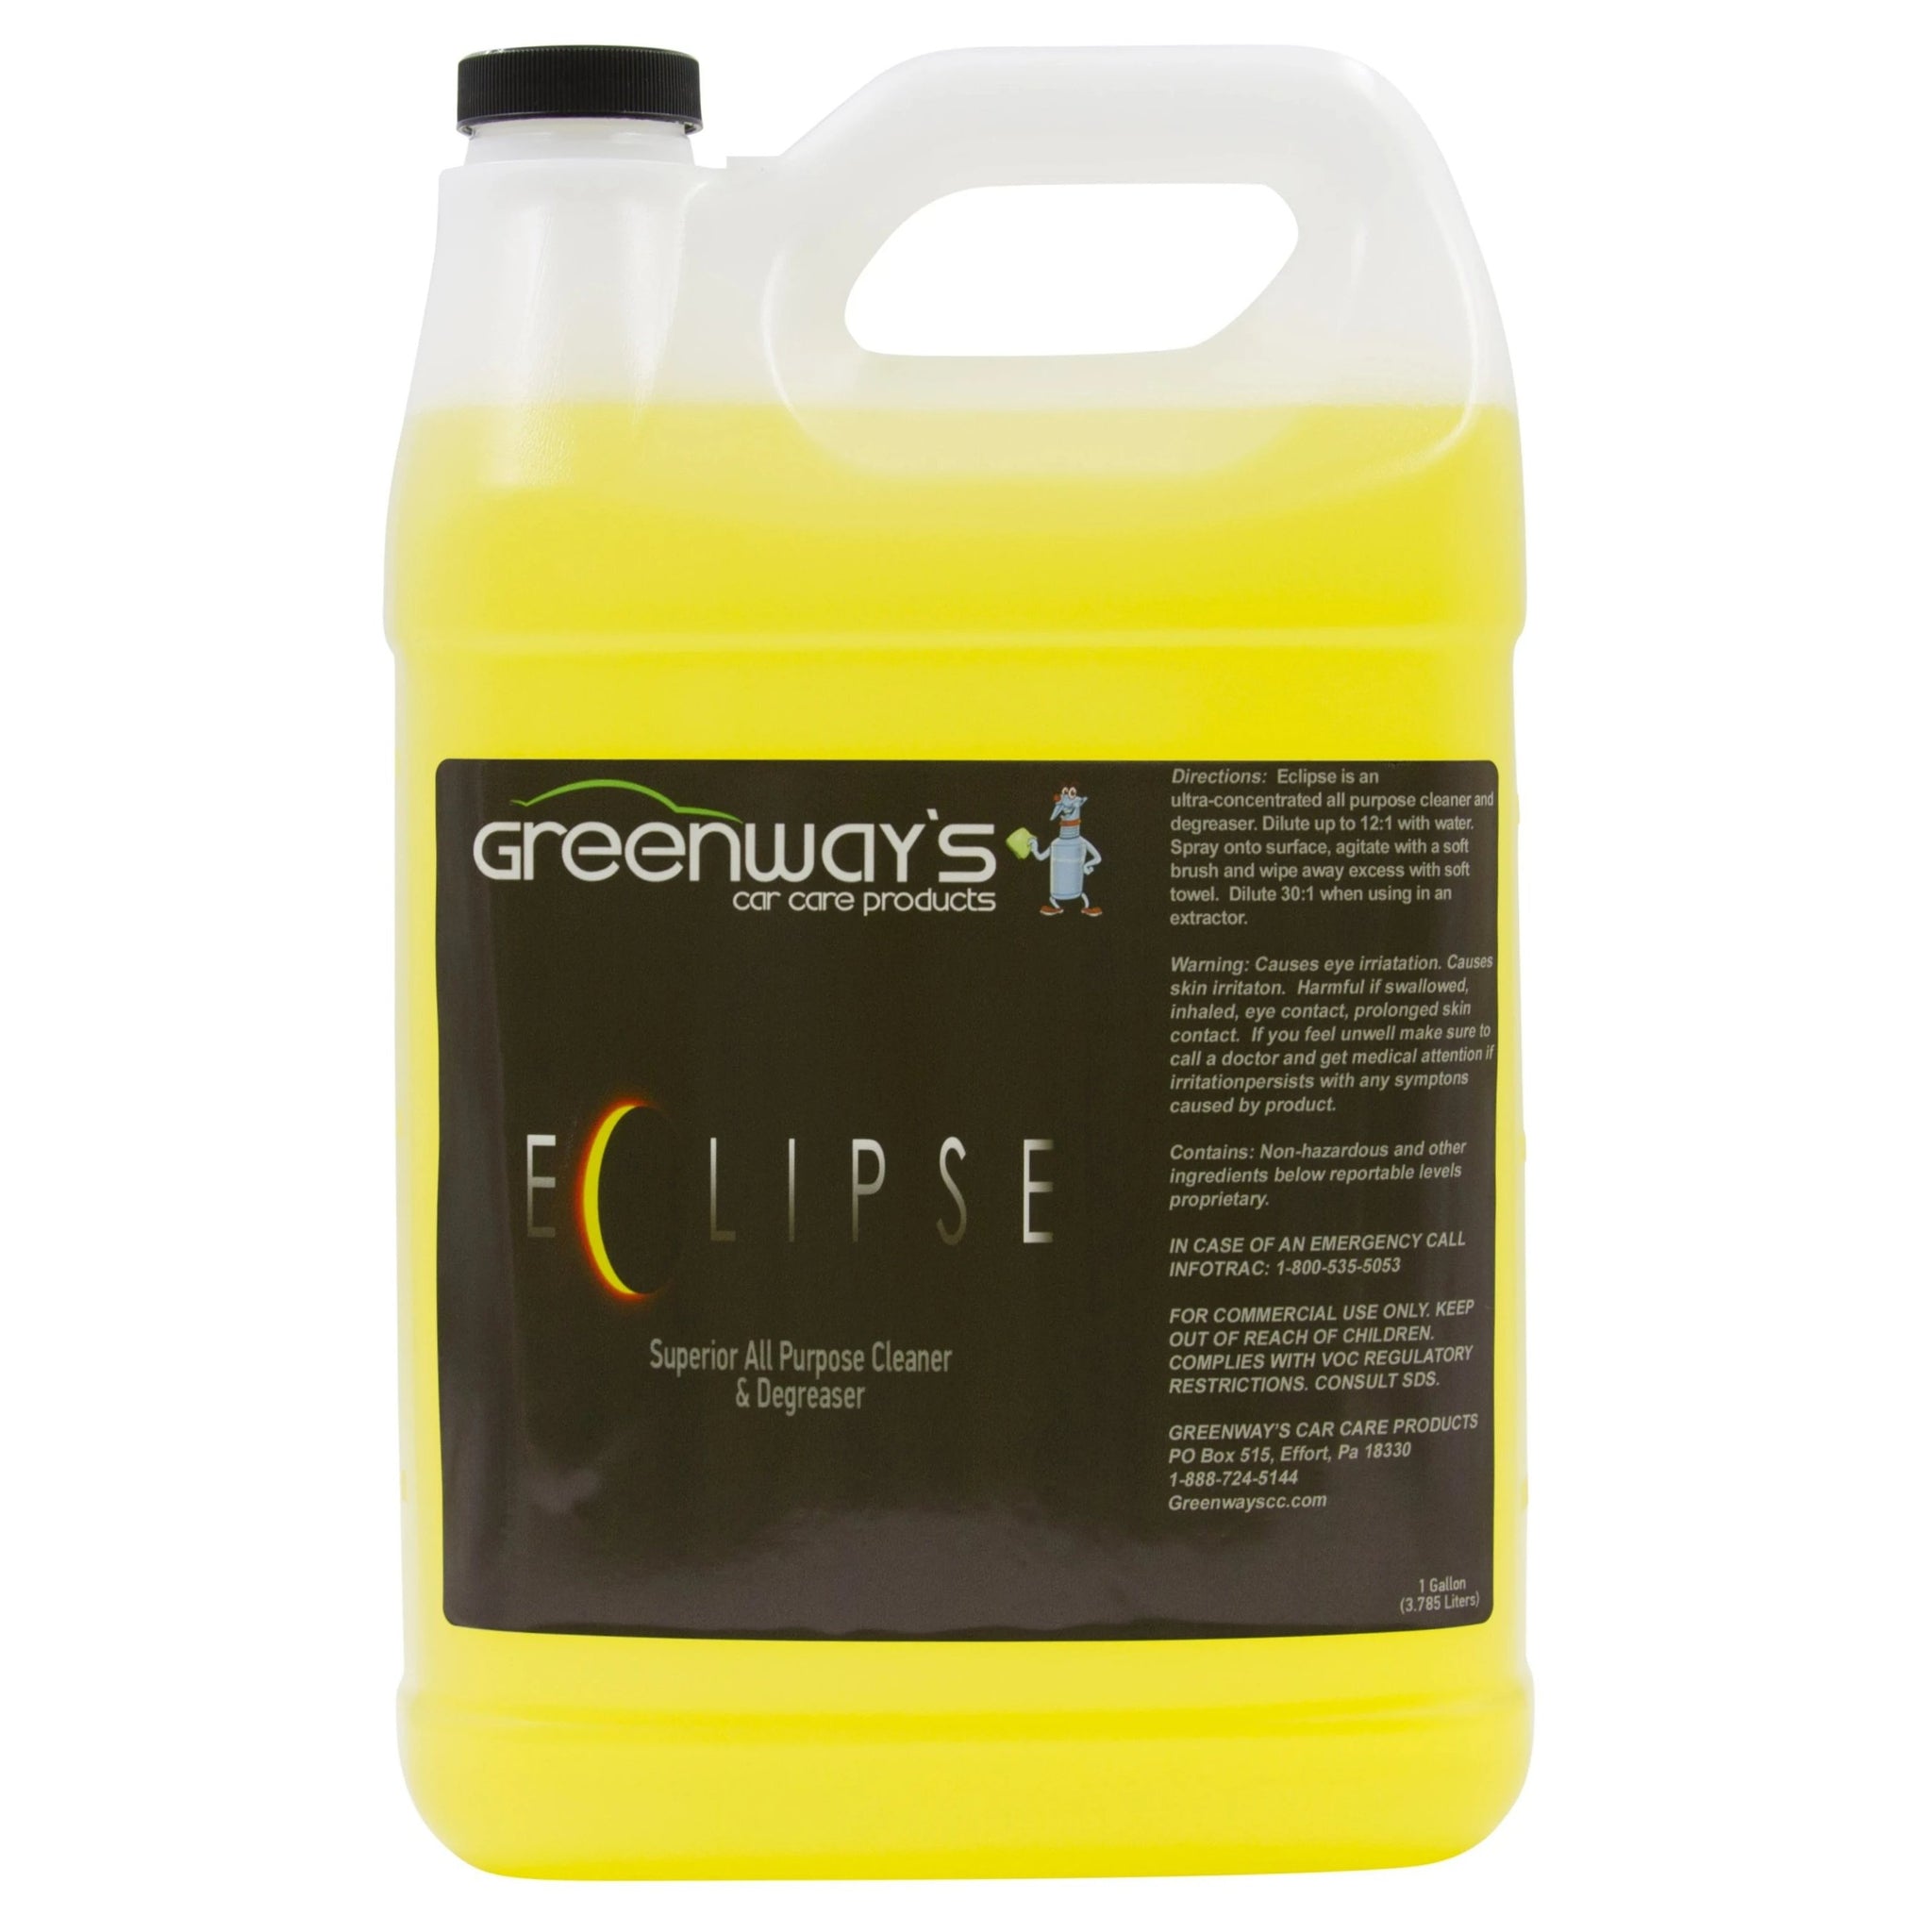 All Purpose Cleaner and Degreaser Concentrate